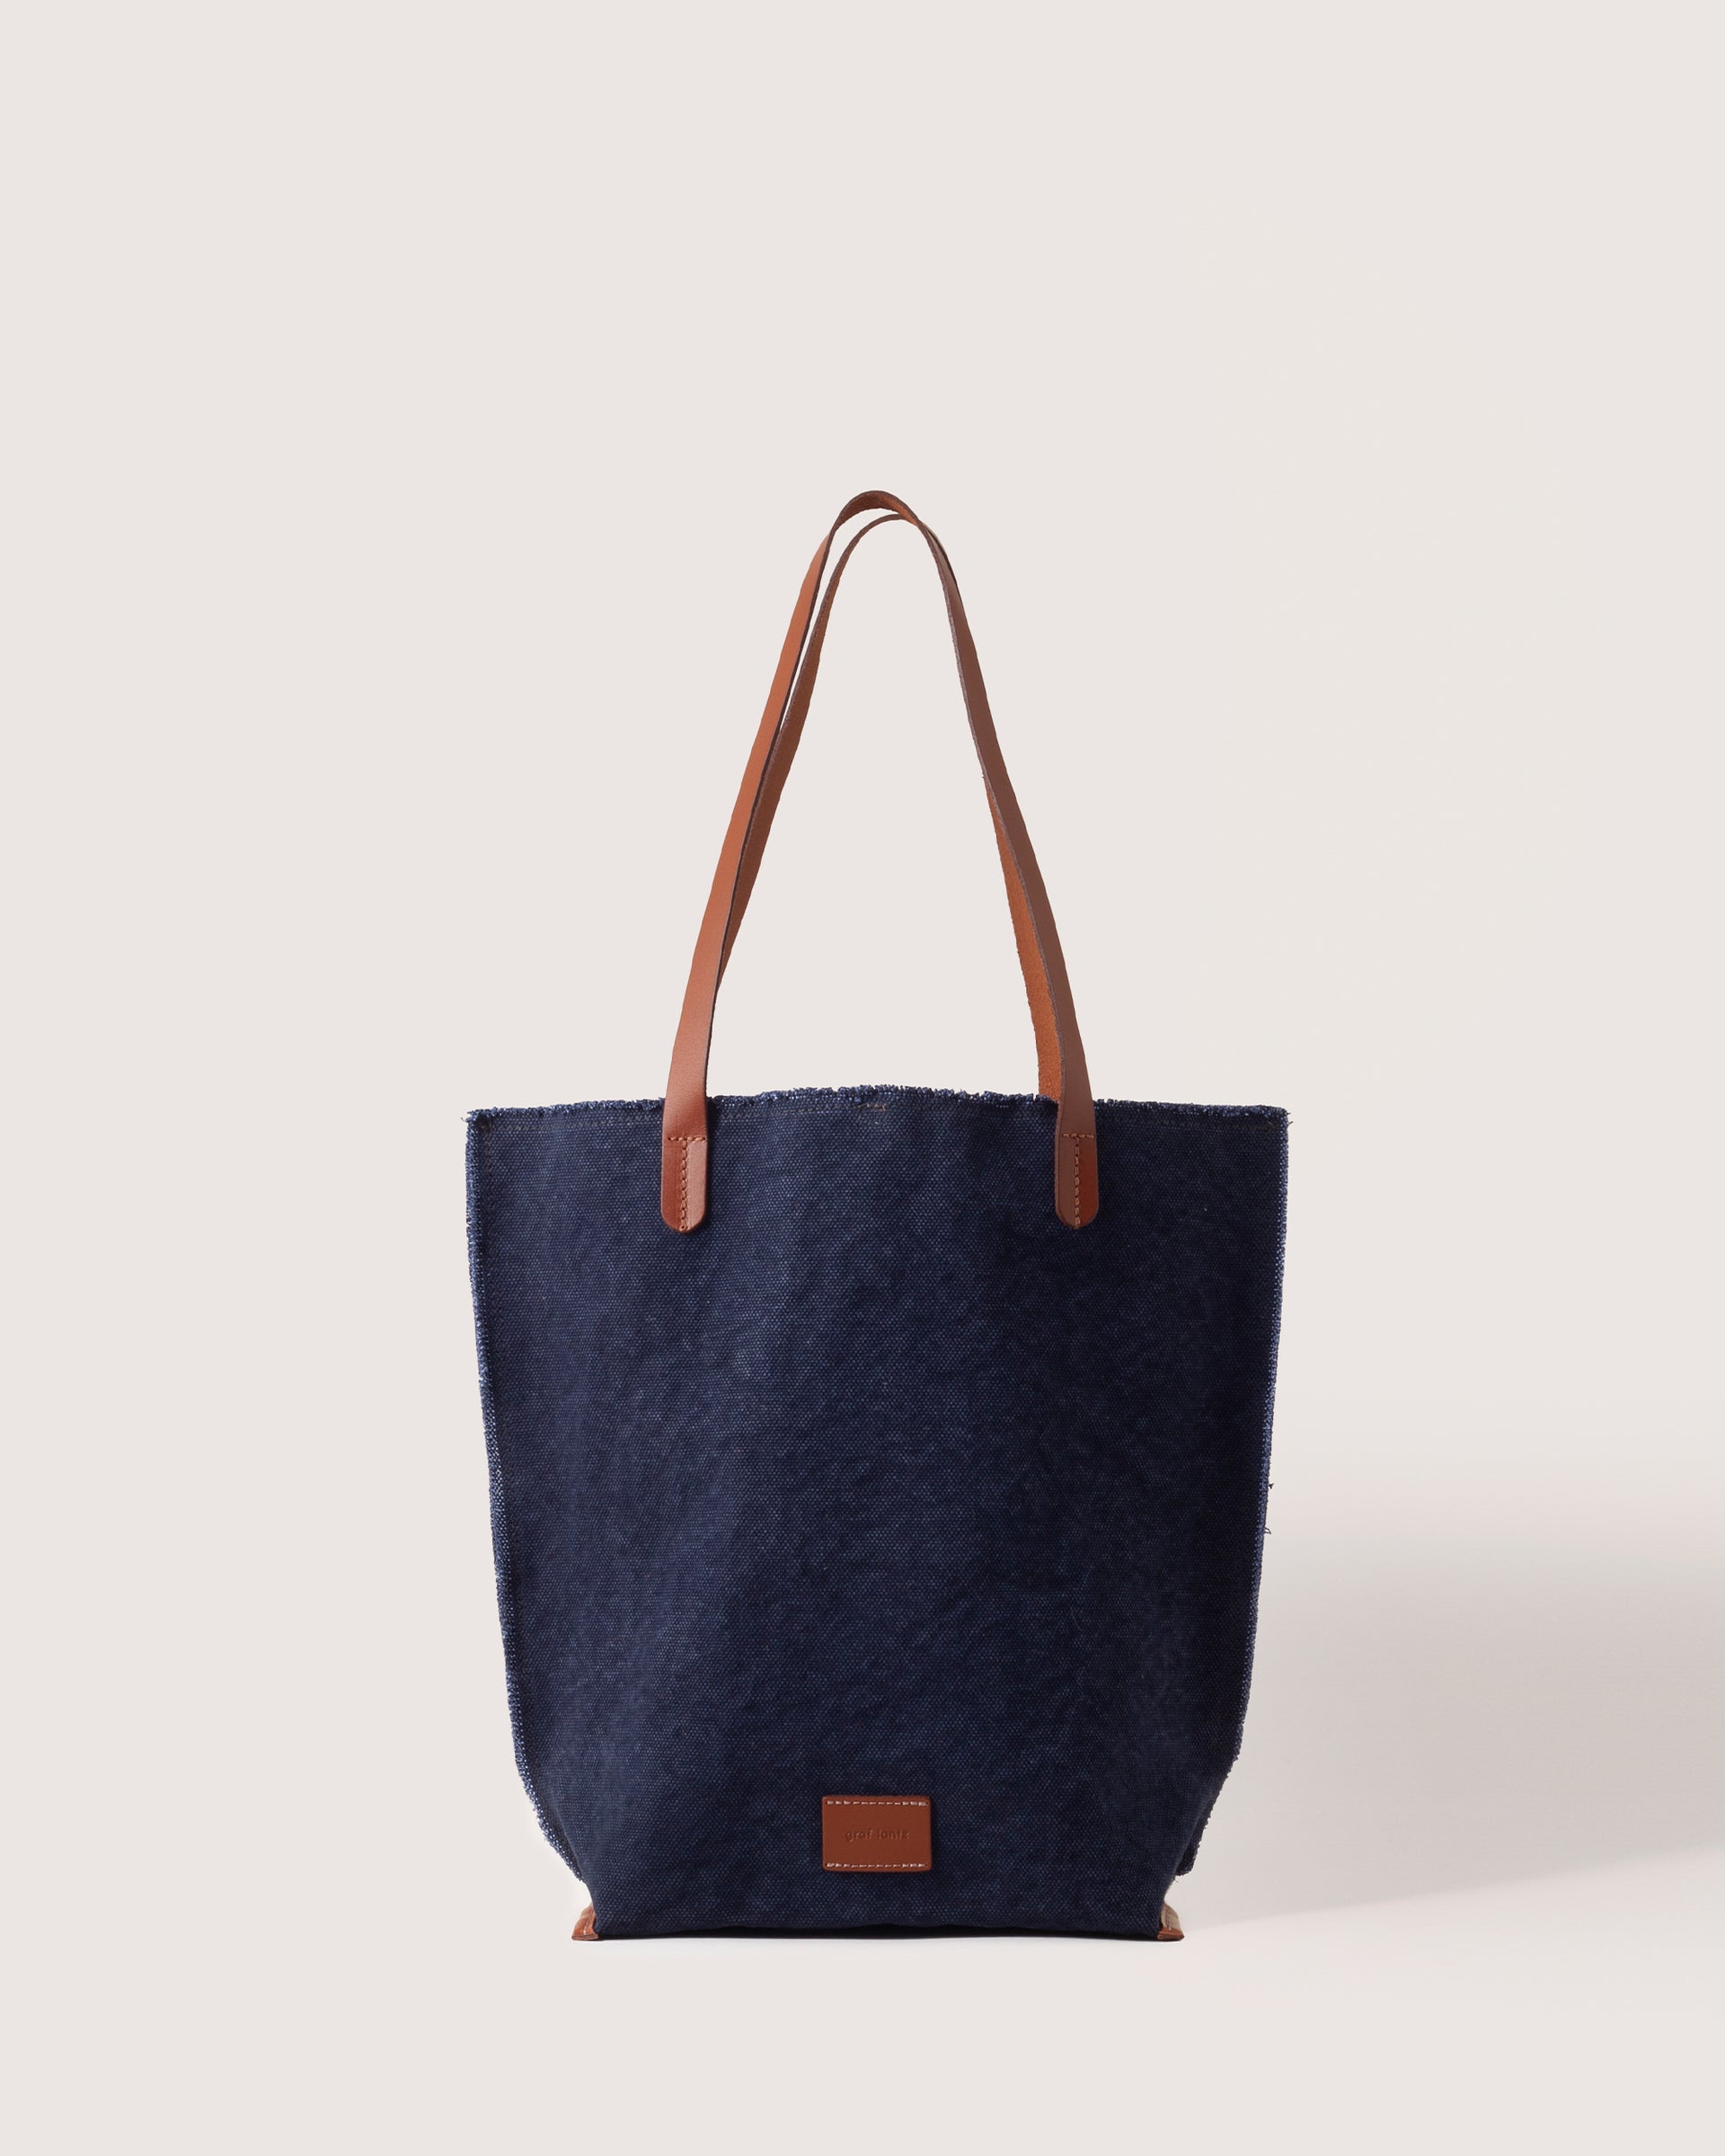 A Hana Canvas Tote in Midnight Sienna with dark brown leather handle, white background